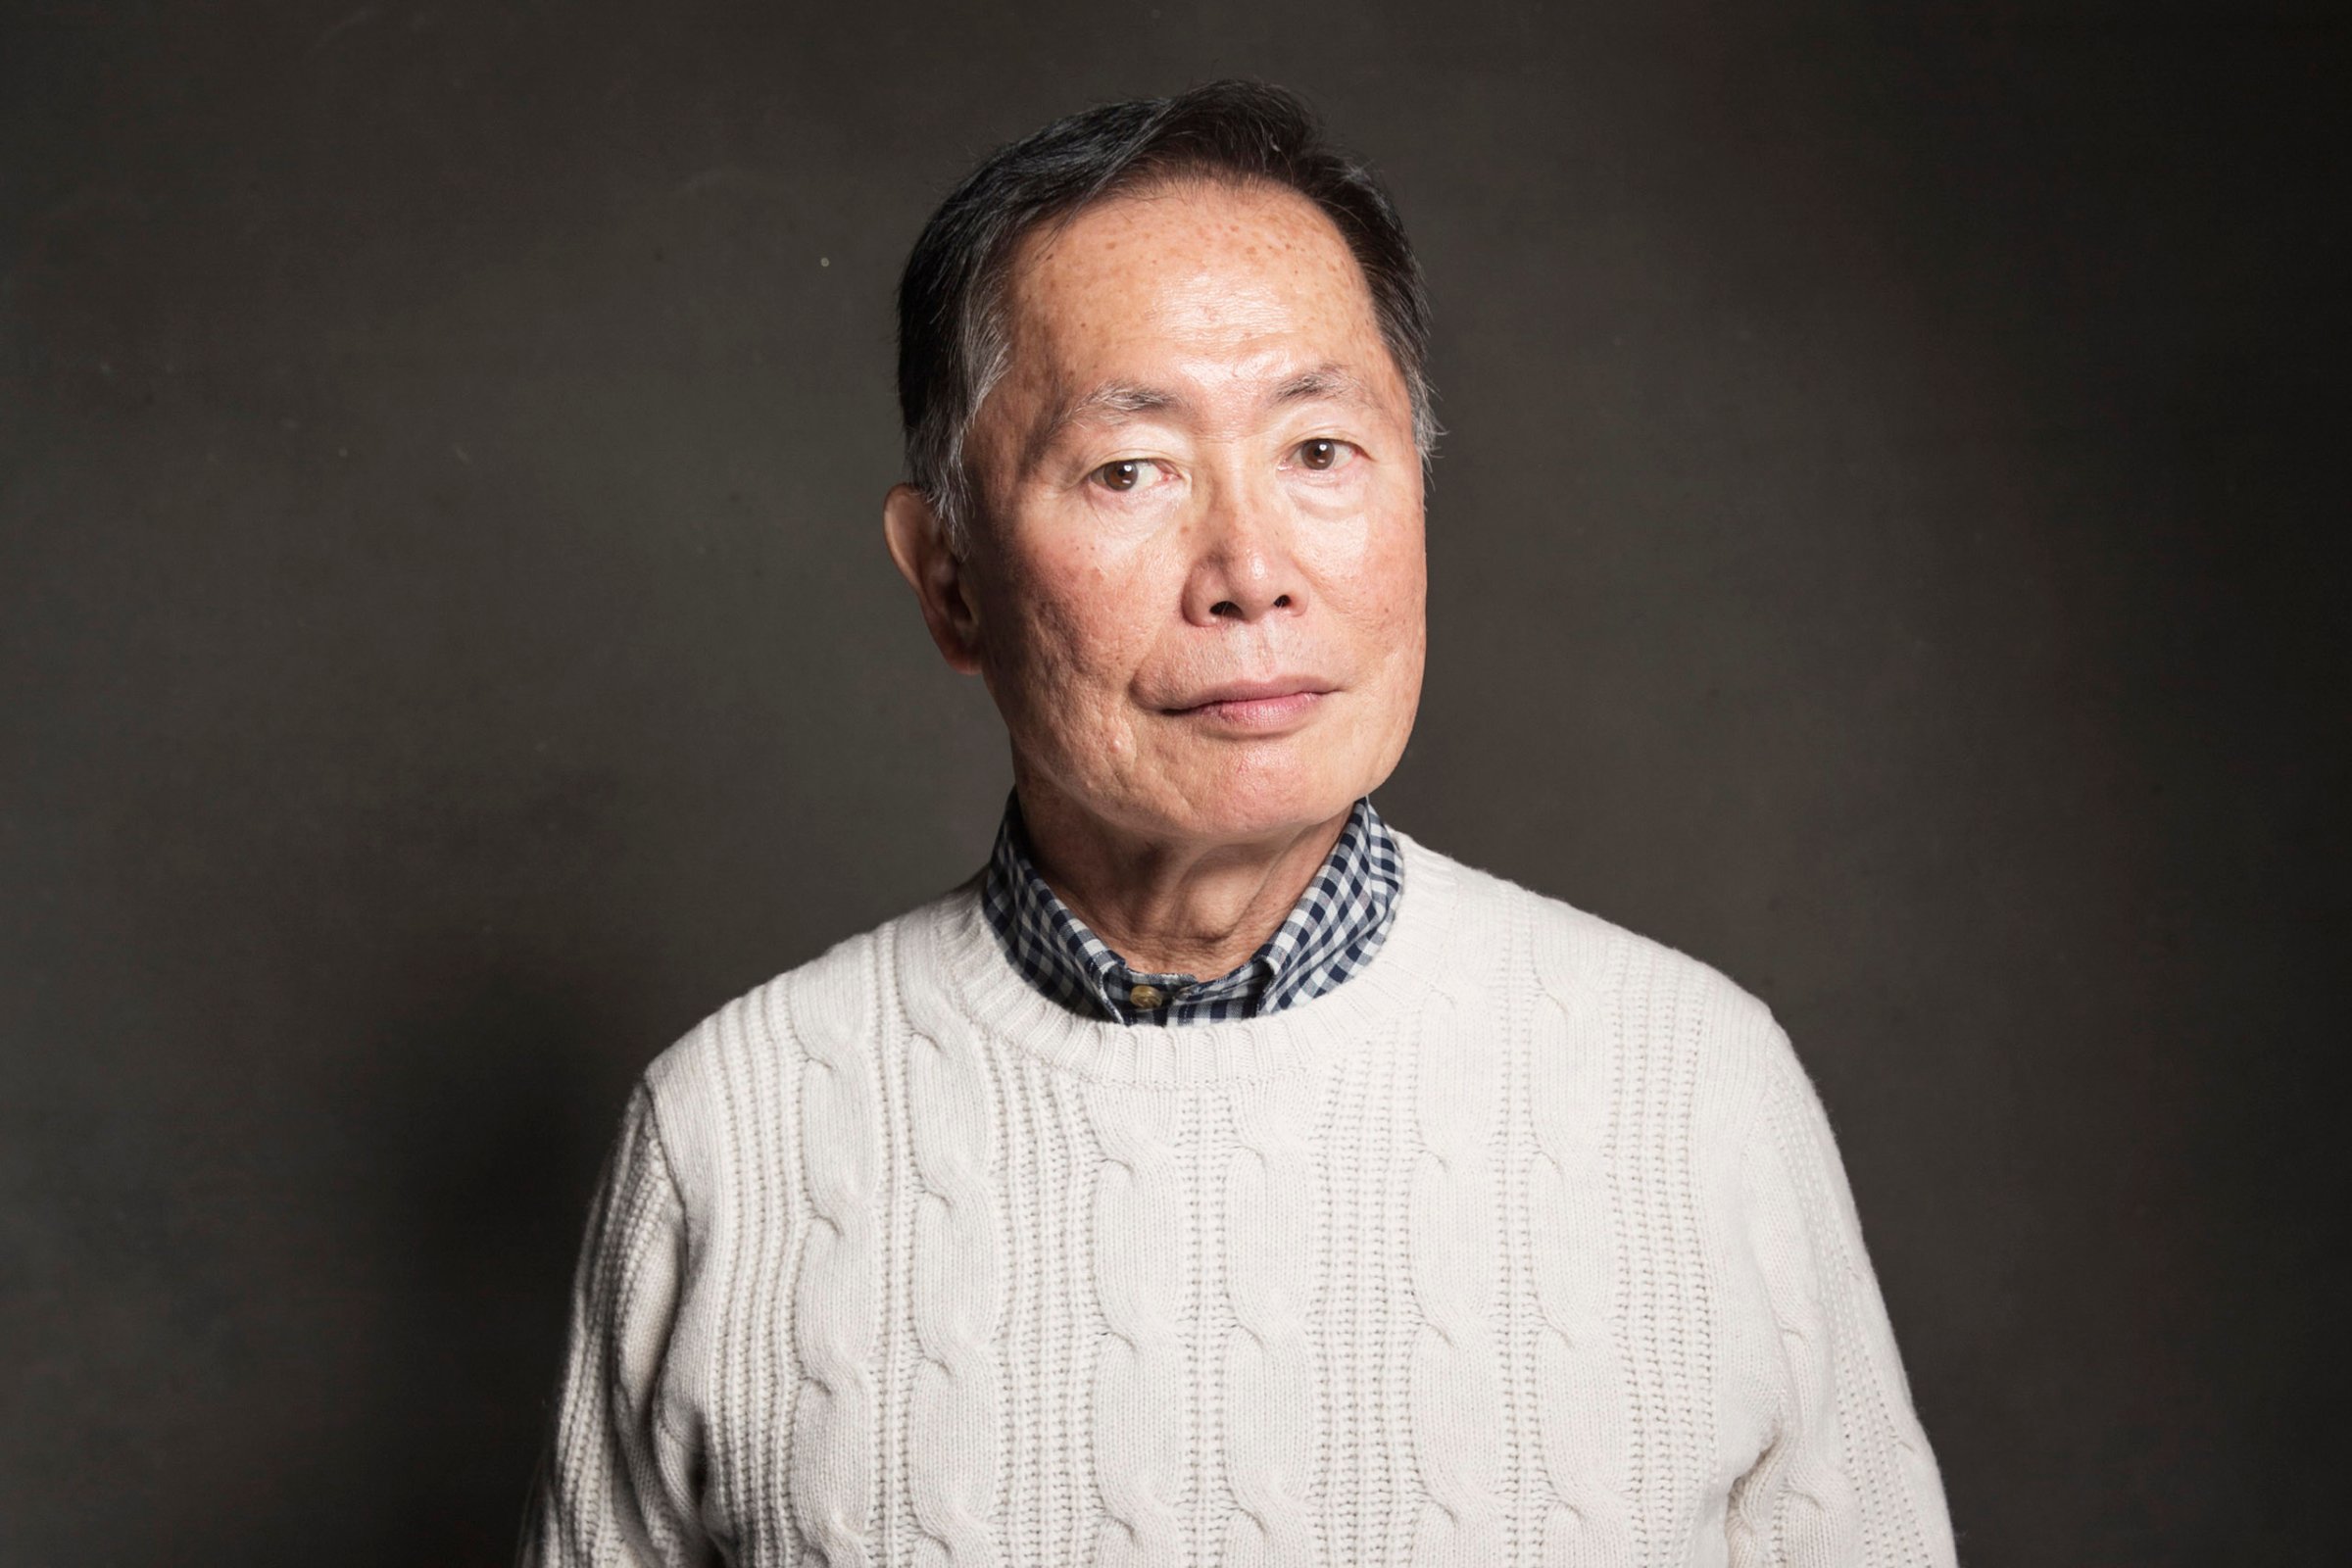 George Takei poses for a portrait during the Sundance Film Festival in Utah on Jan. 18, 2014.